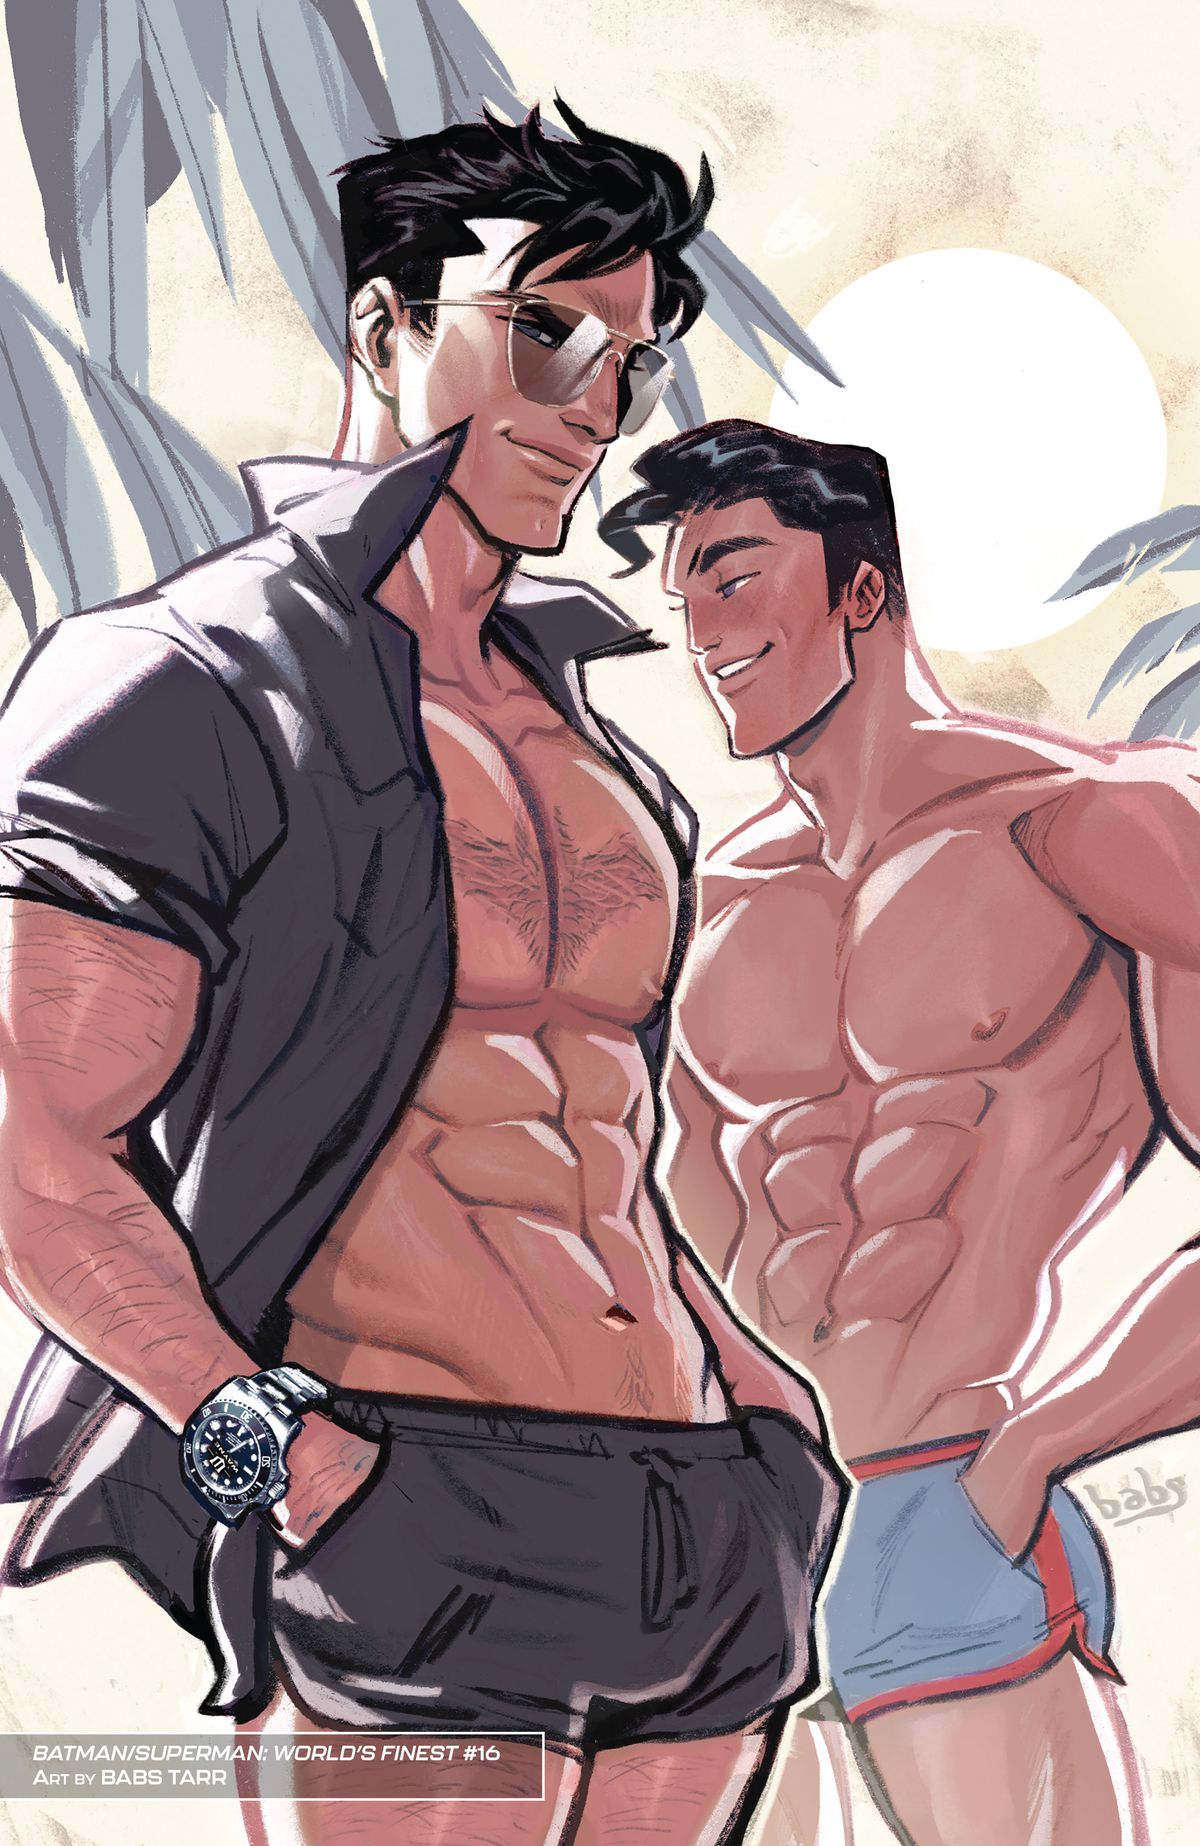 Batman and Superman stand like models, each wearing rather short swim trunks in the colors of their costumes. Batman is wearing sunglasses and a very expensive watch, and his chest hair is subtly trimmed in the shape of the bat symbol. 